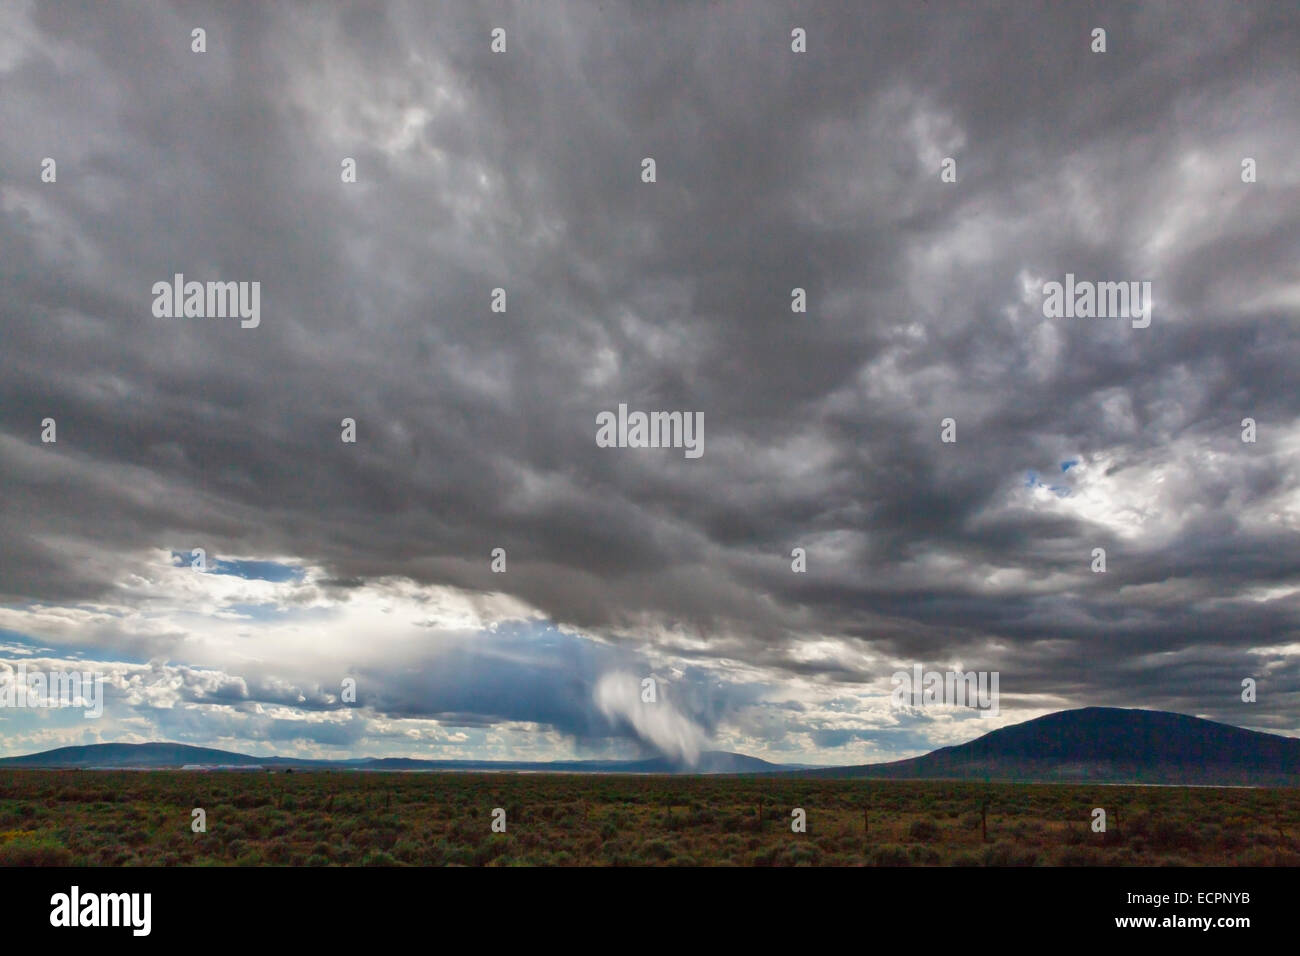 Stormy sky and high desert - SOUTHERN, NEW MEXICO Stock Photo